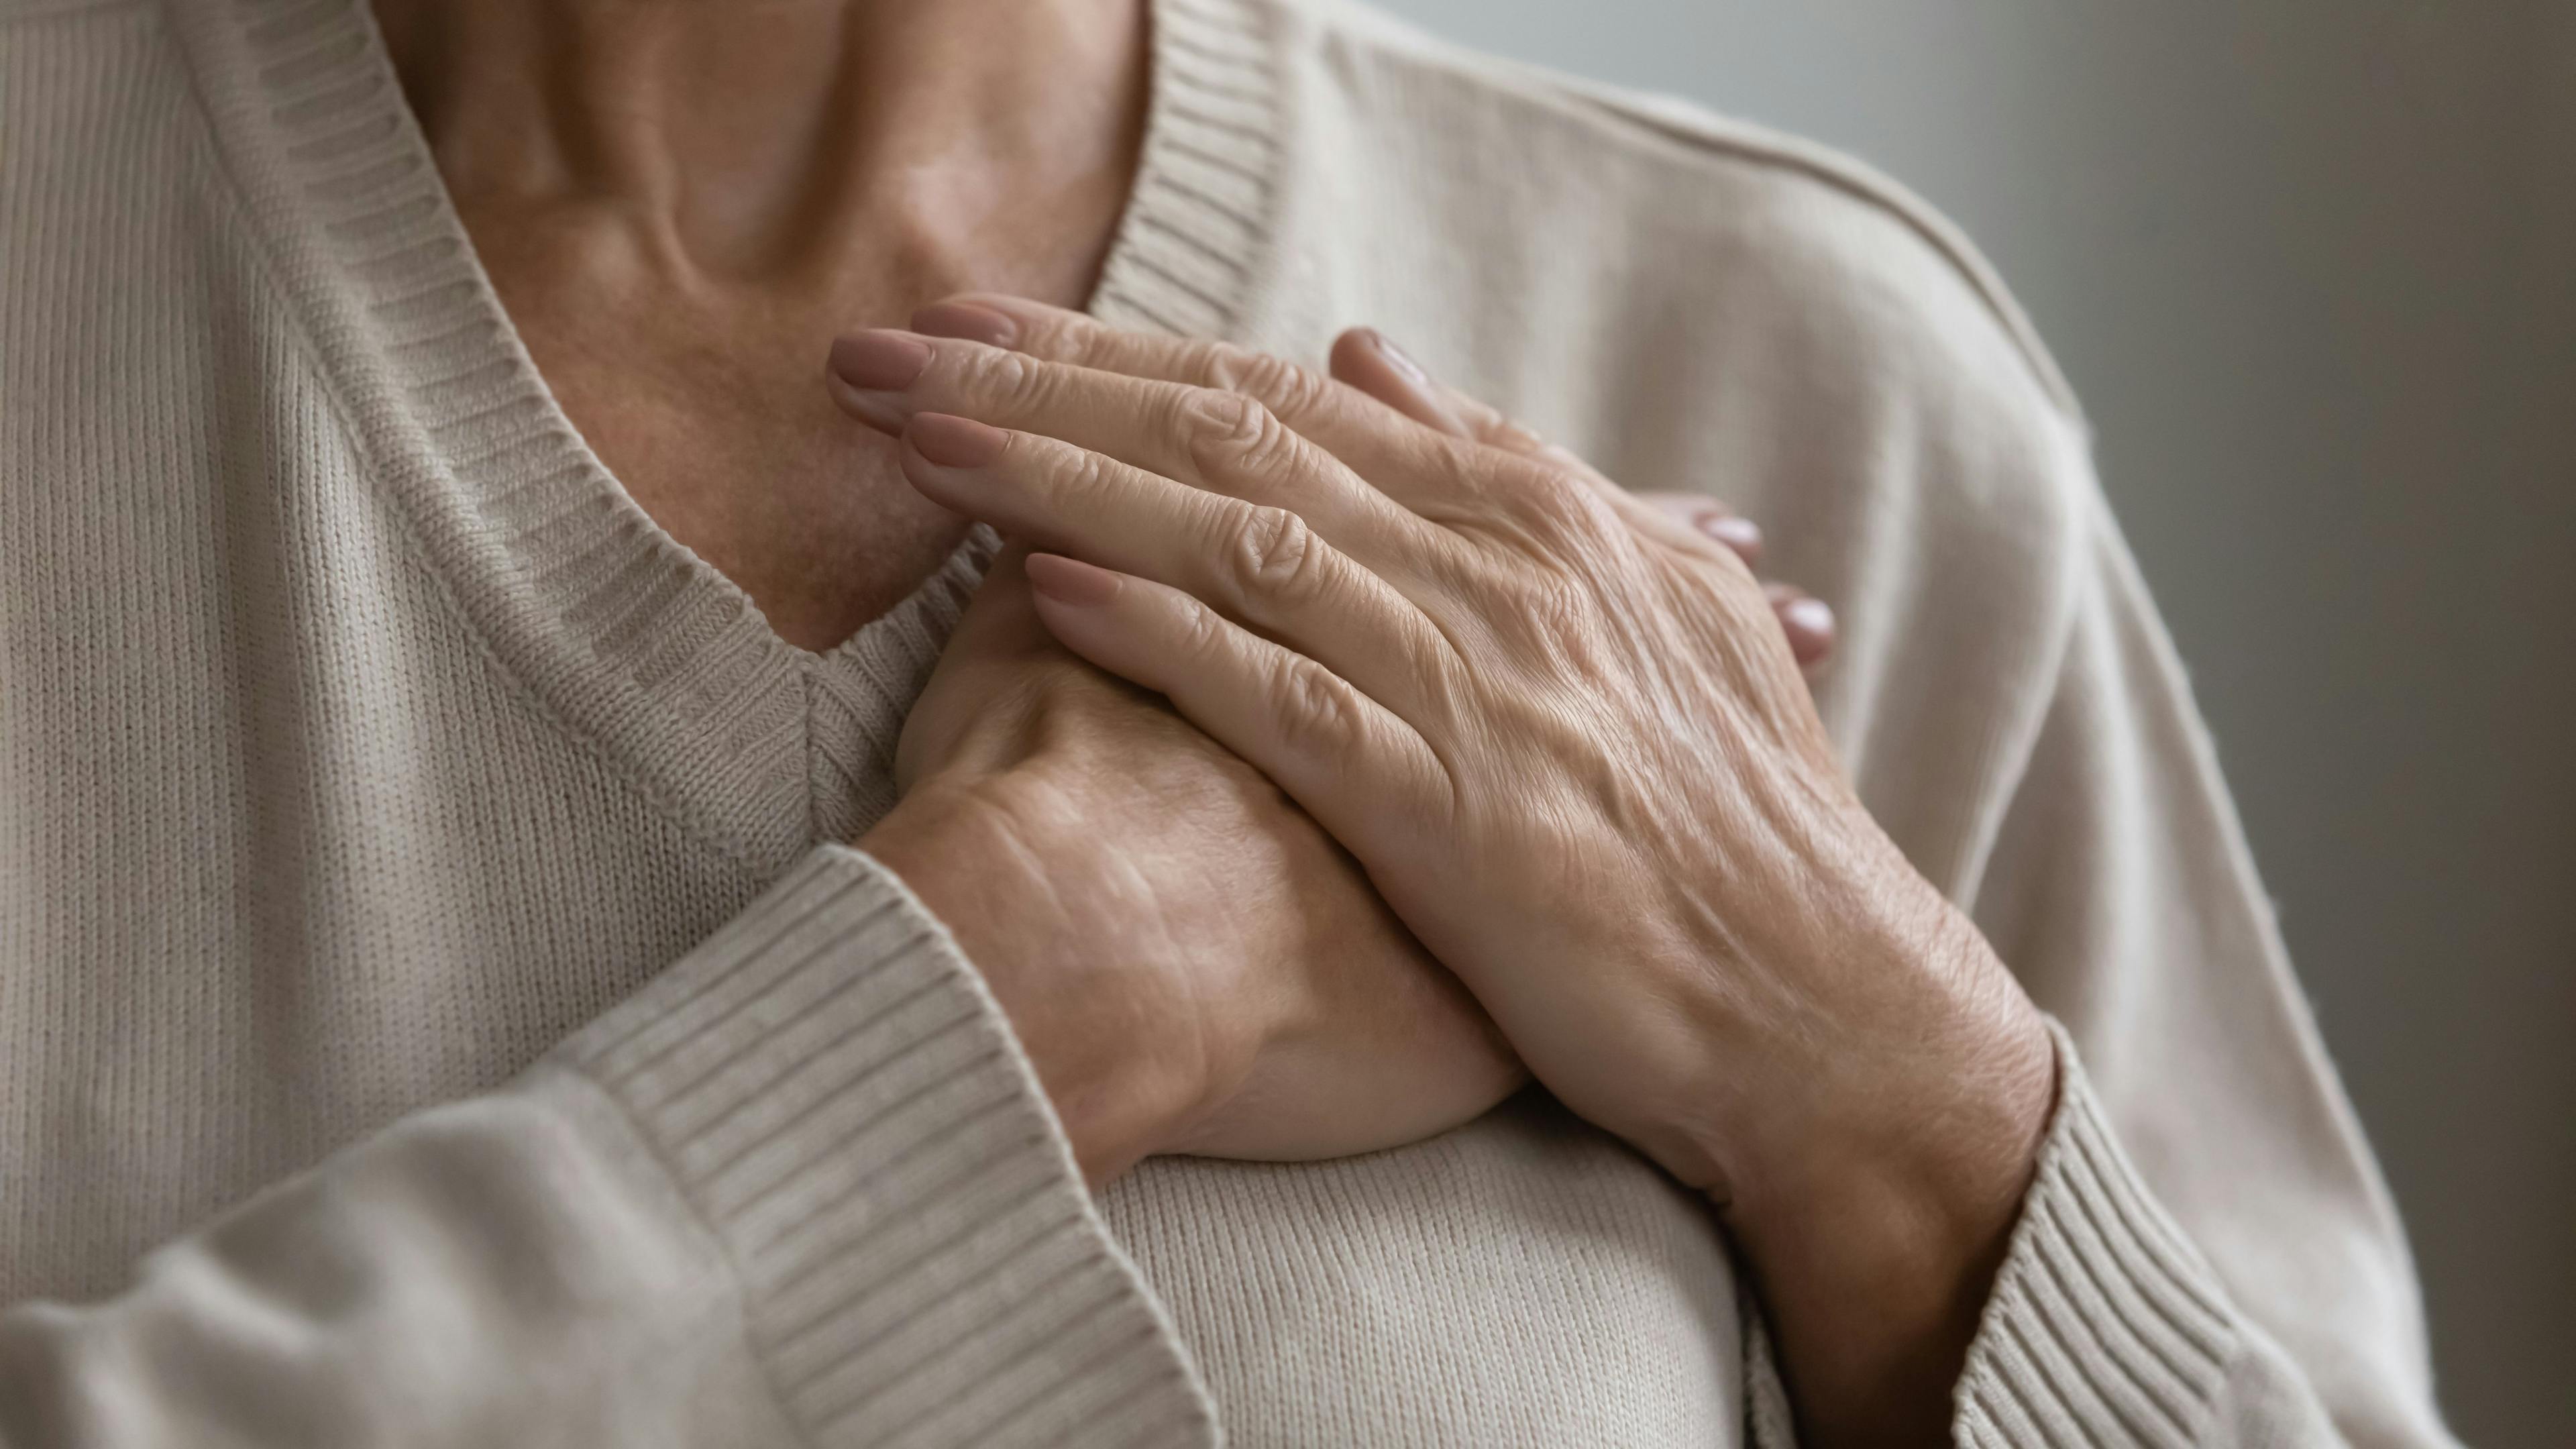 Mature elderly woman feeling heart pain, touching chest with both hands | Image Credit: fizkes - stock.adobe.com